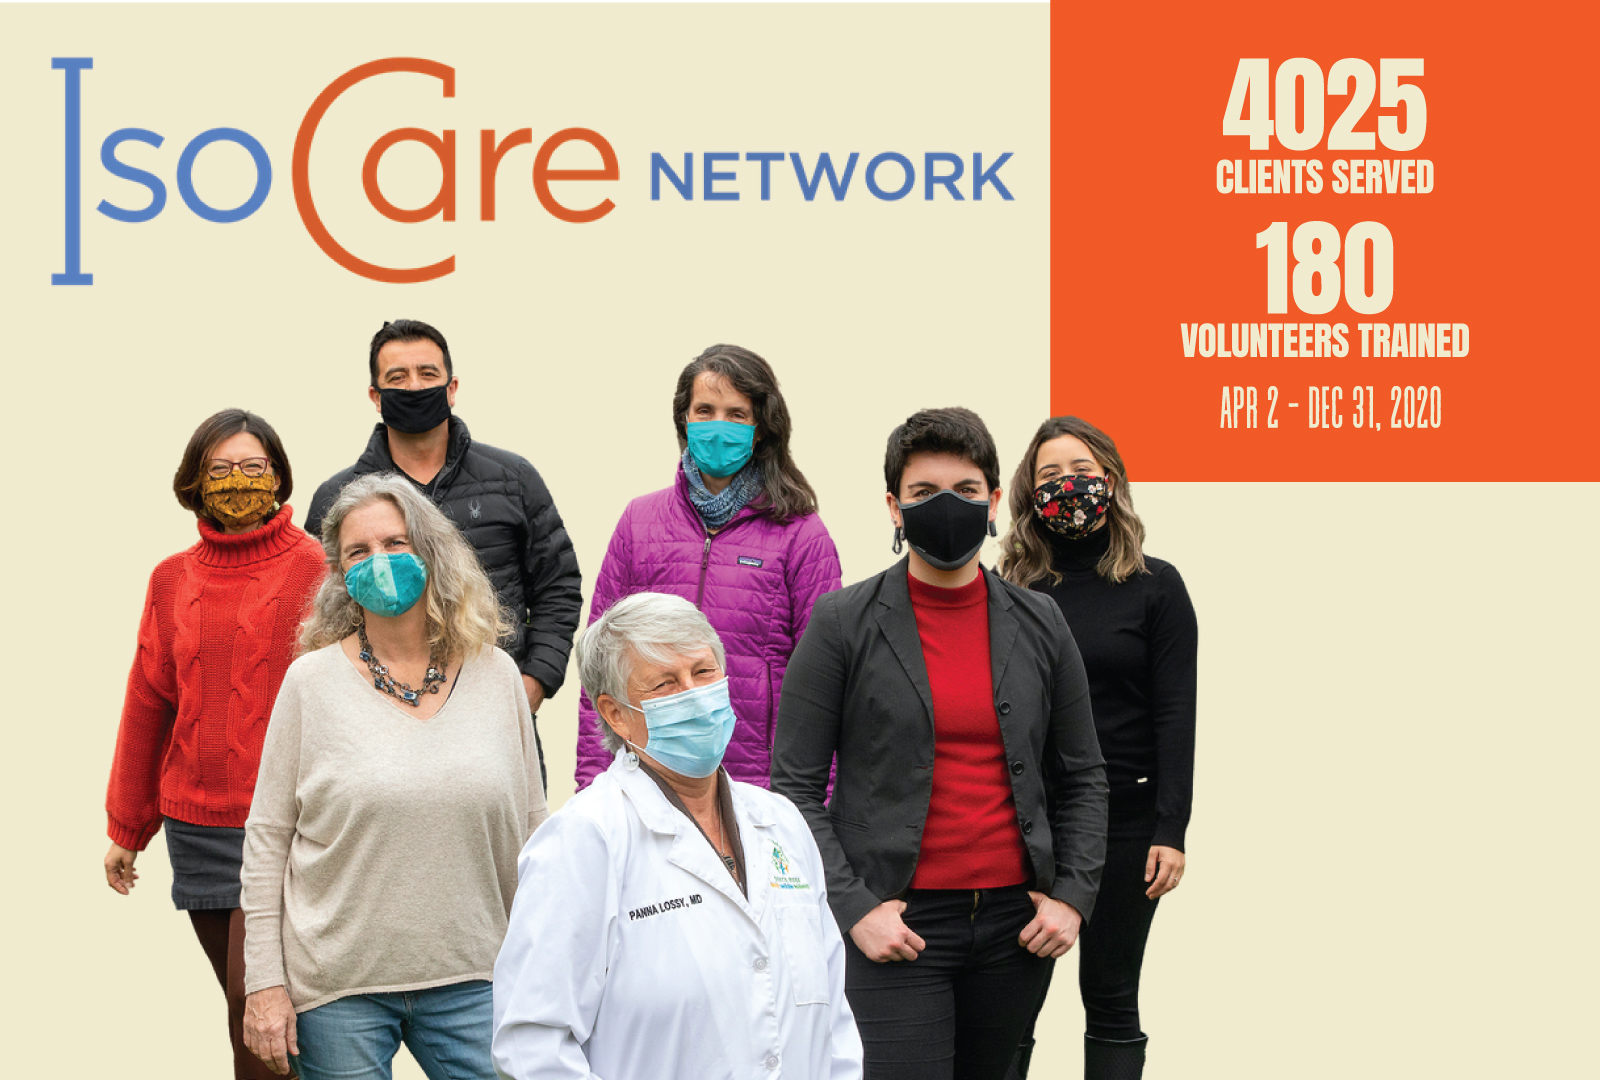 Masked community members standing together and smiling. Text: IsoCare Network, 4025 clients served, 180 volunteers trained, Apr. 2-Dec. 31, 2020